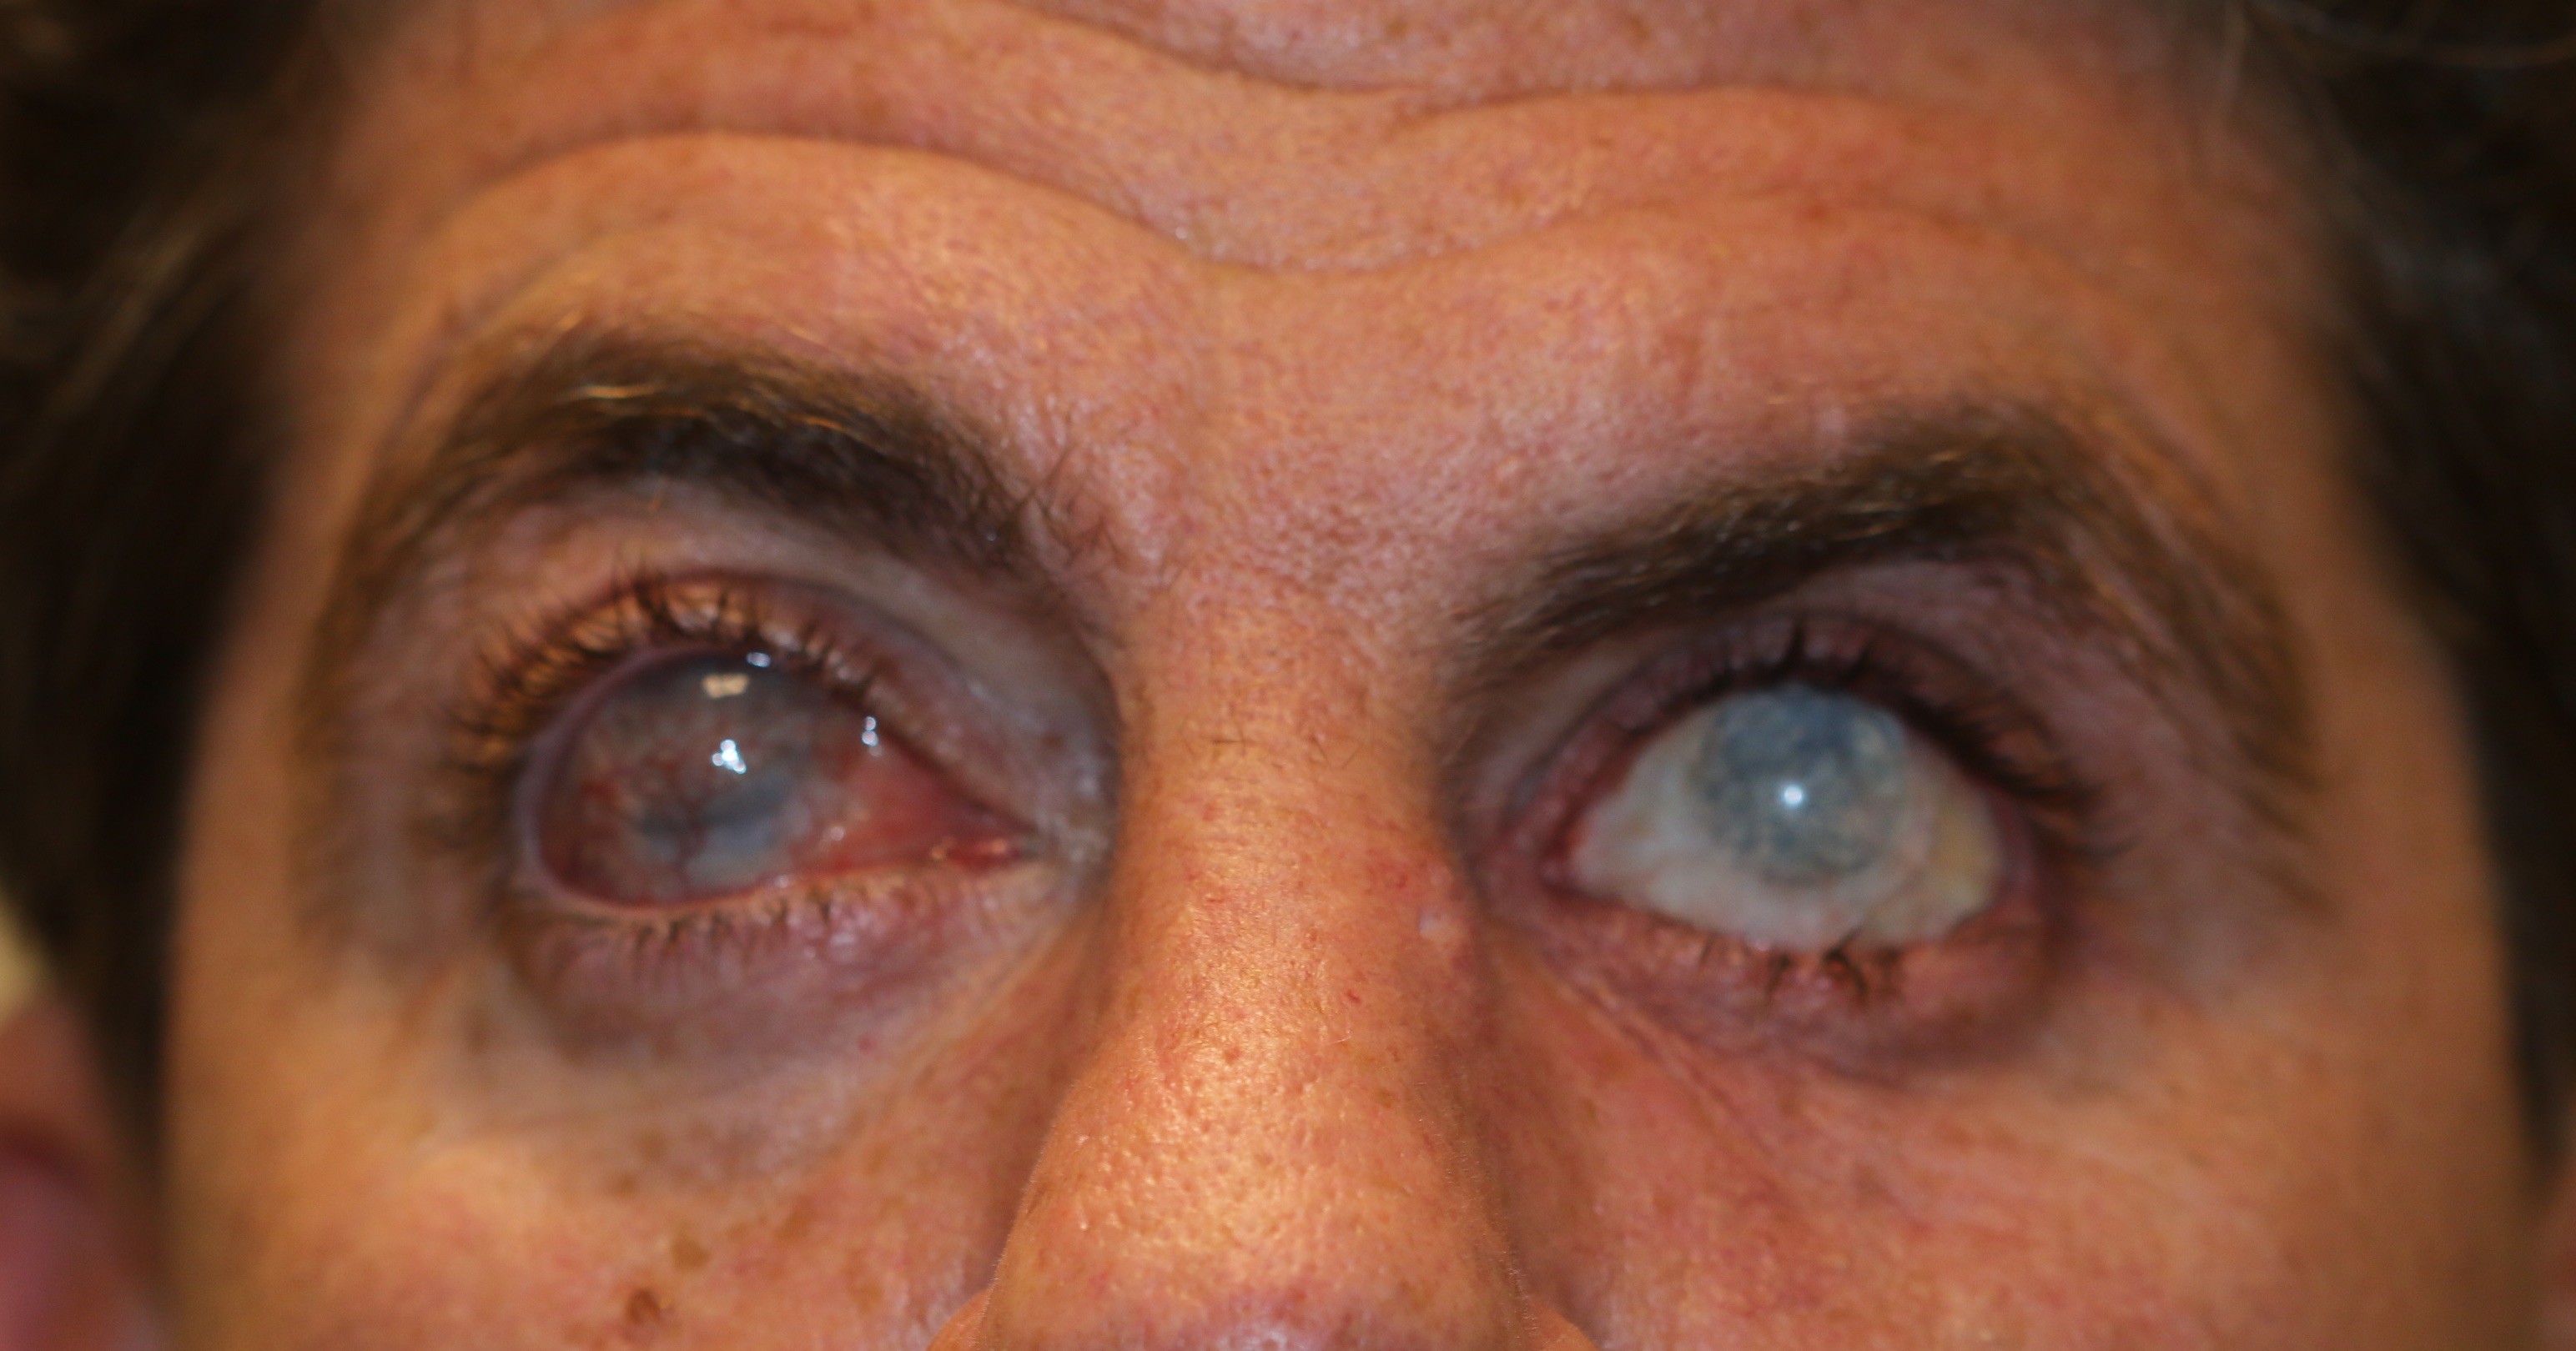 Buphthalmos in an adult. This patient had buphthalmos as a child which was inadequately treated. Enlargement of the globes is seen together with opacification of the corneas